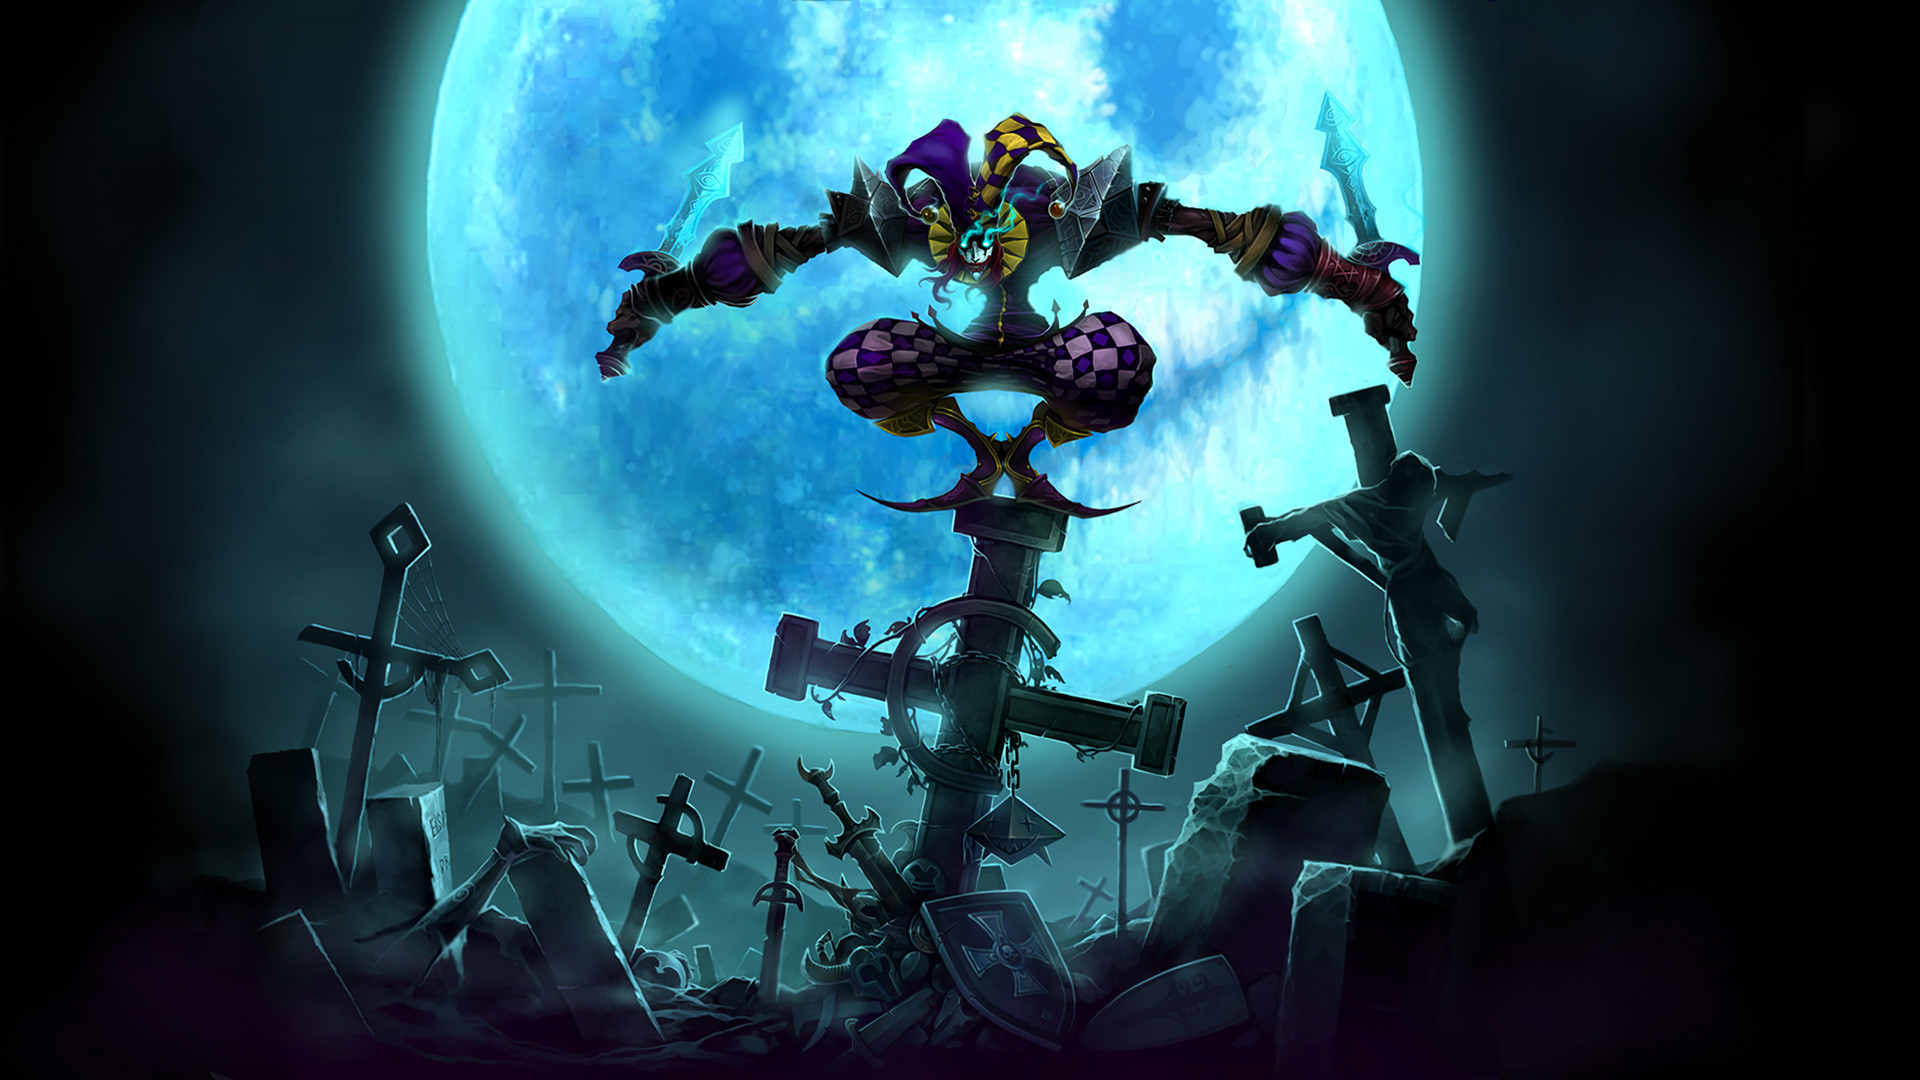 shaco wallpaper 1920x1080,cg artwork,illustration,space,darkness,fictional character